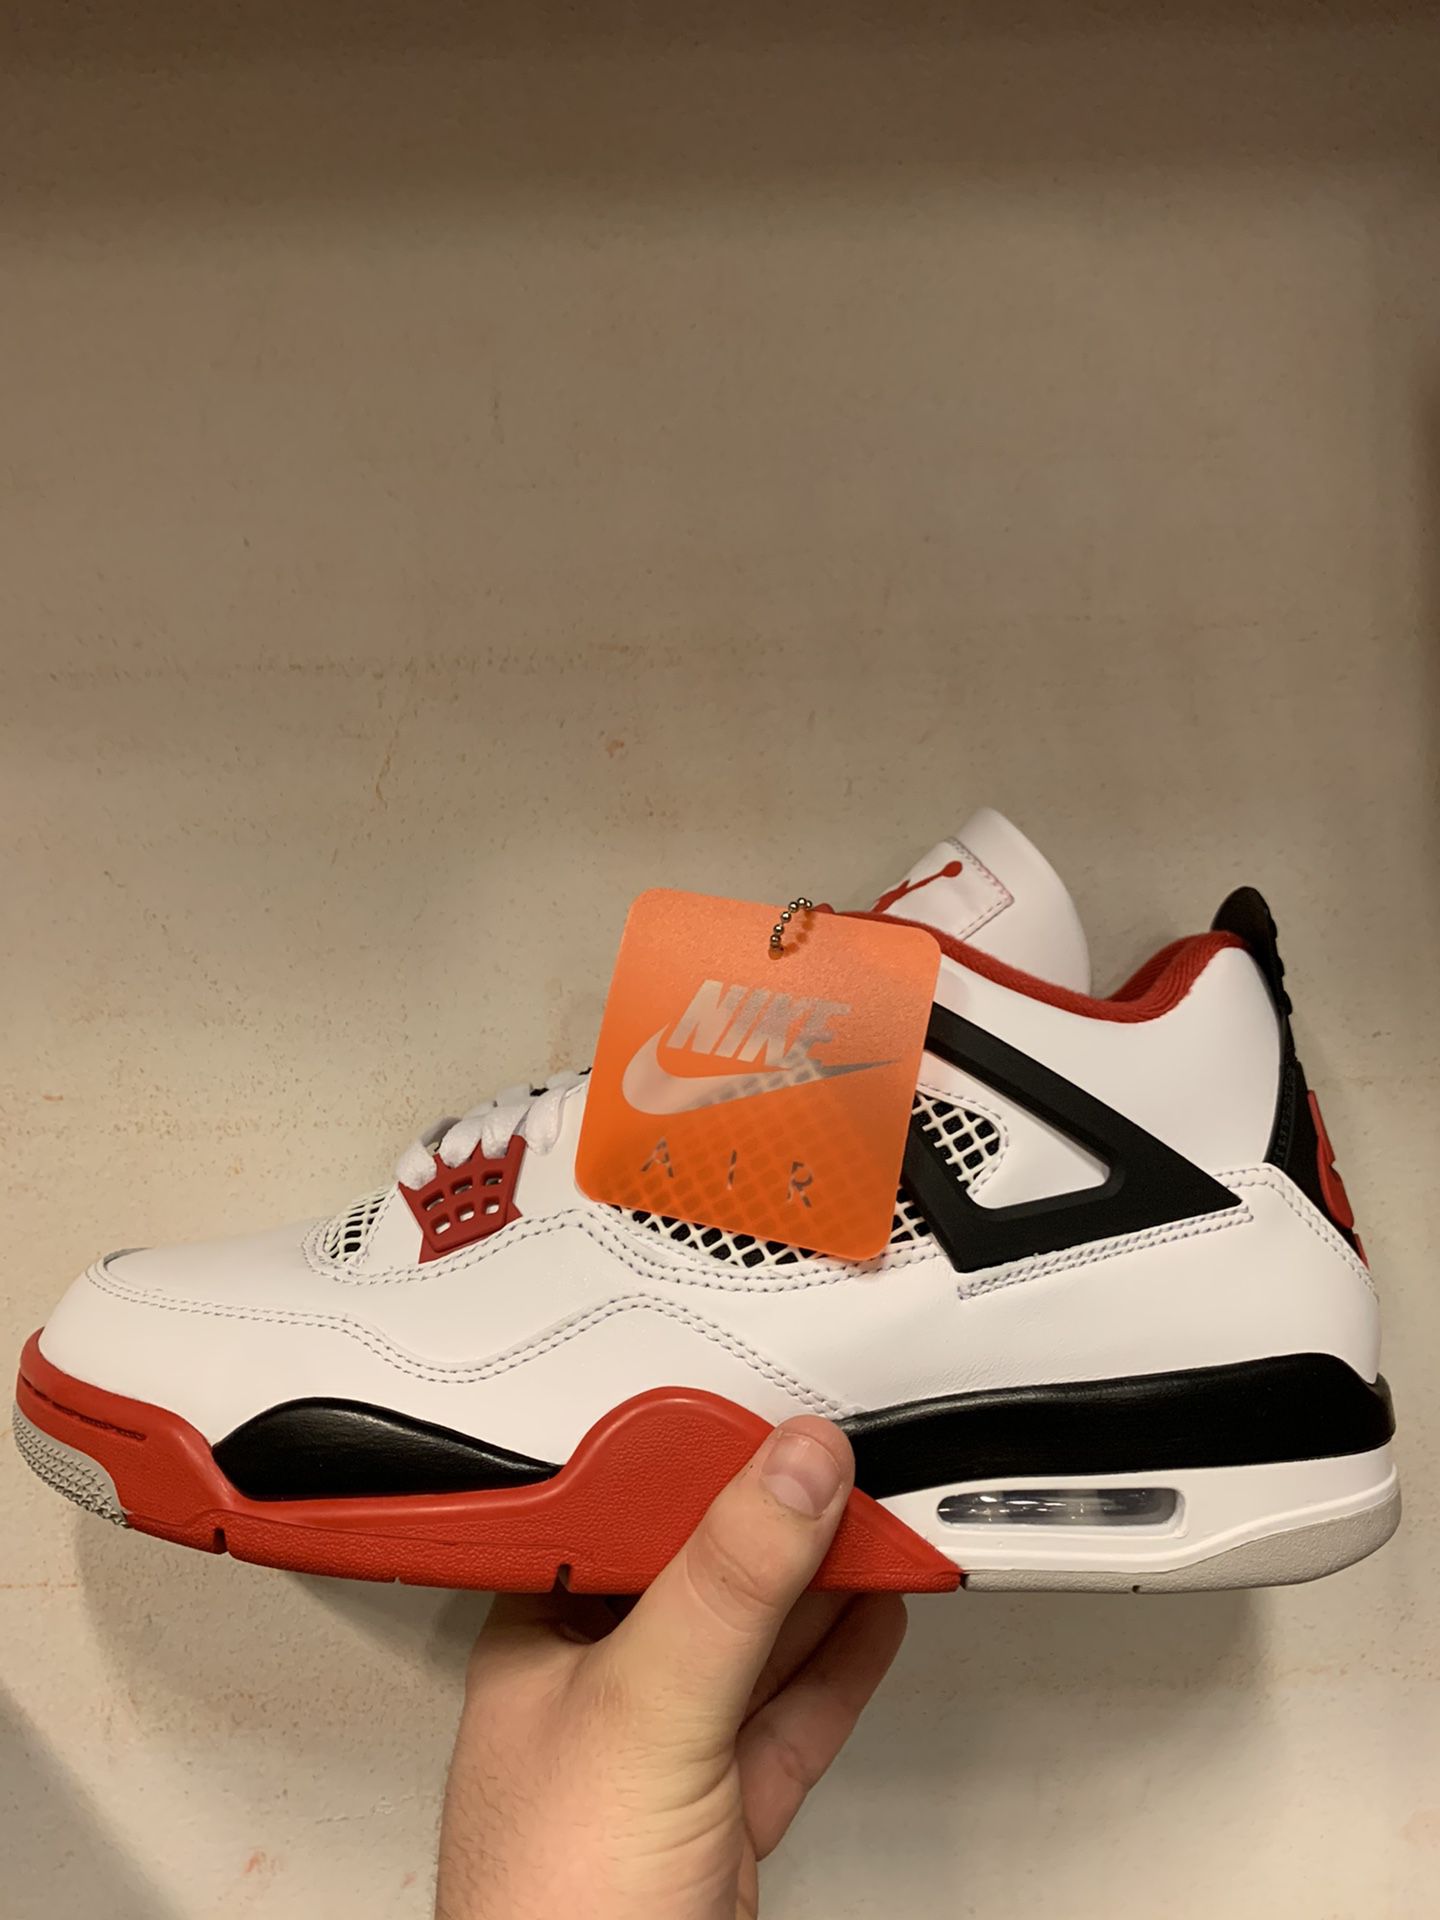 Fire Red 4’s Size 10 Ds